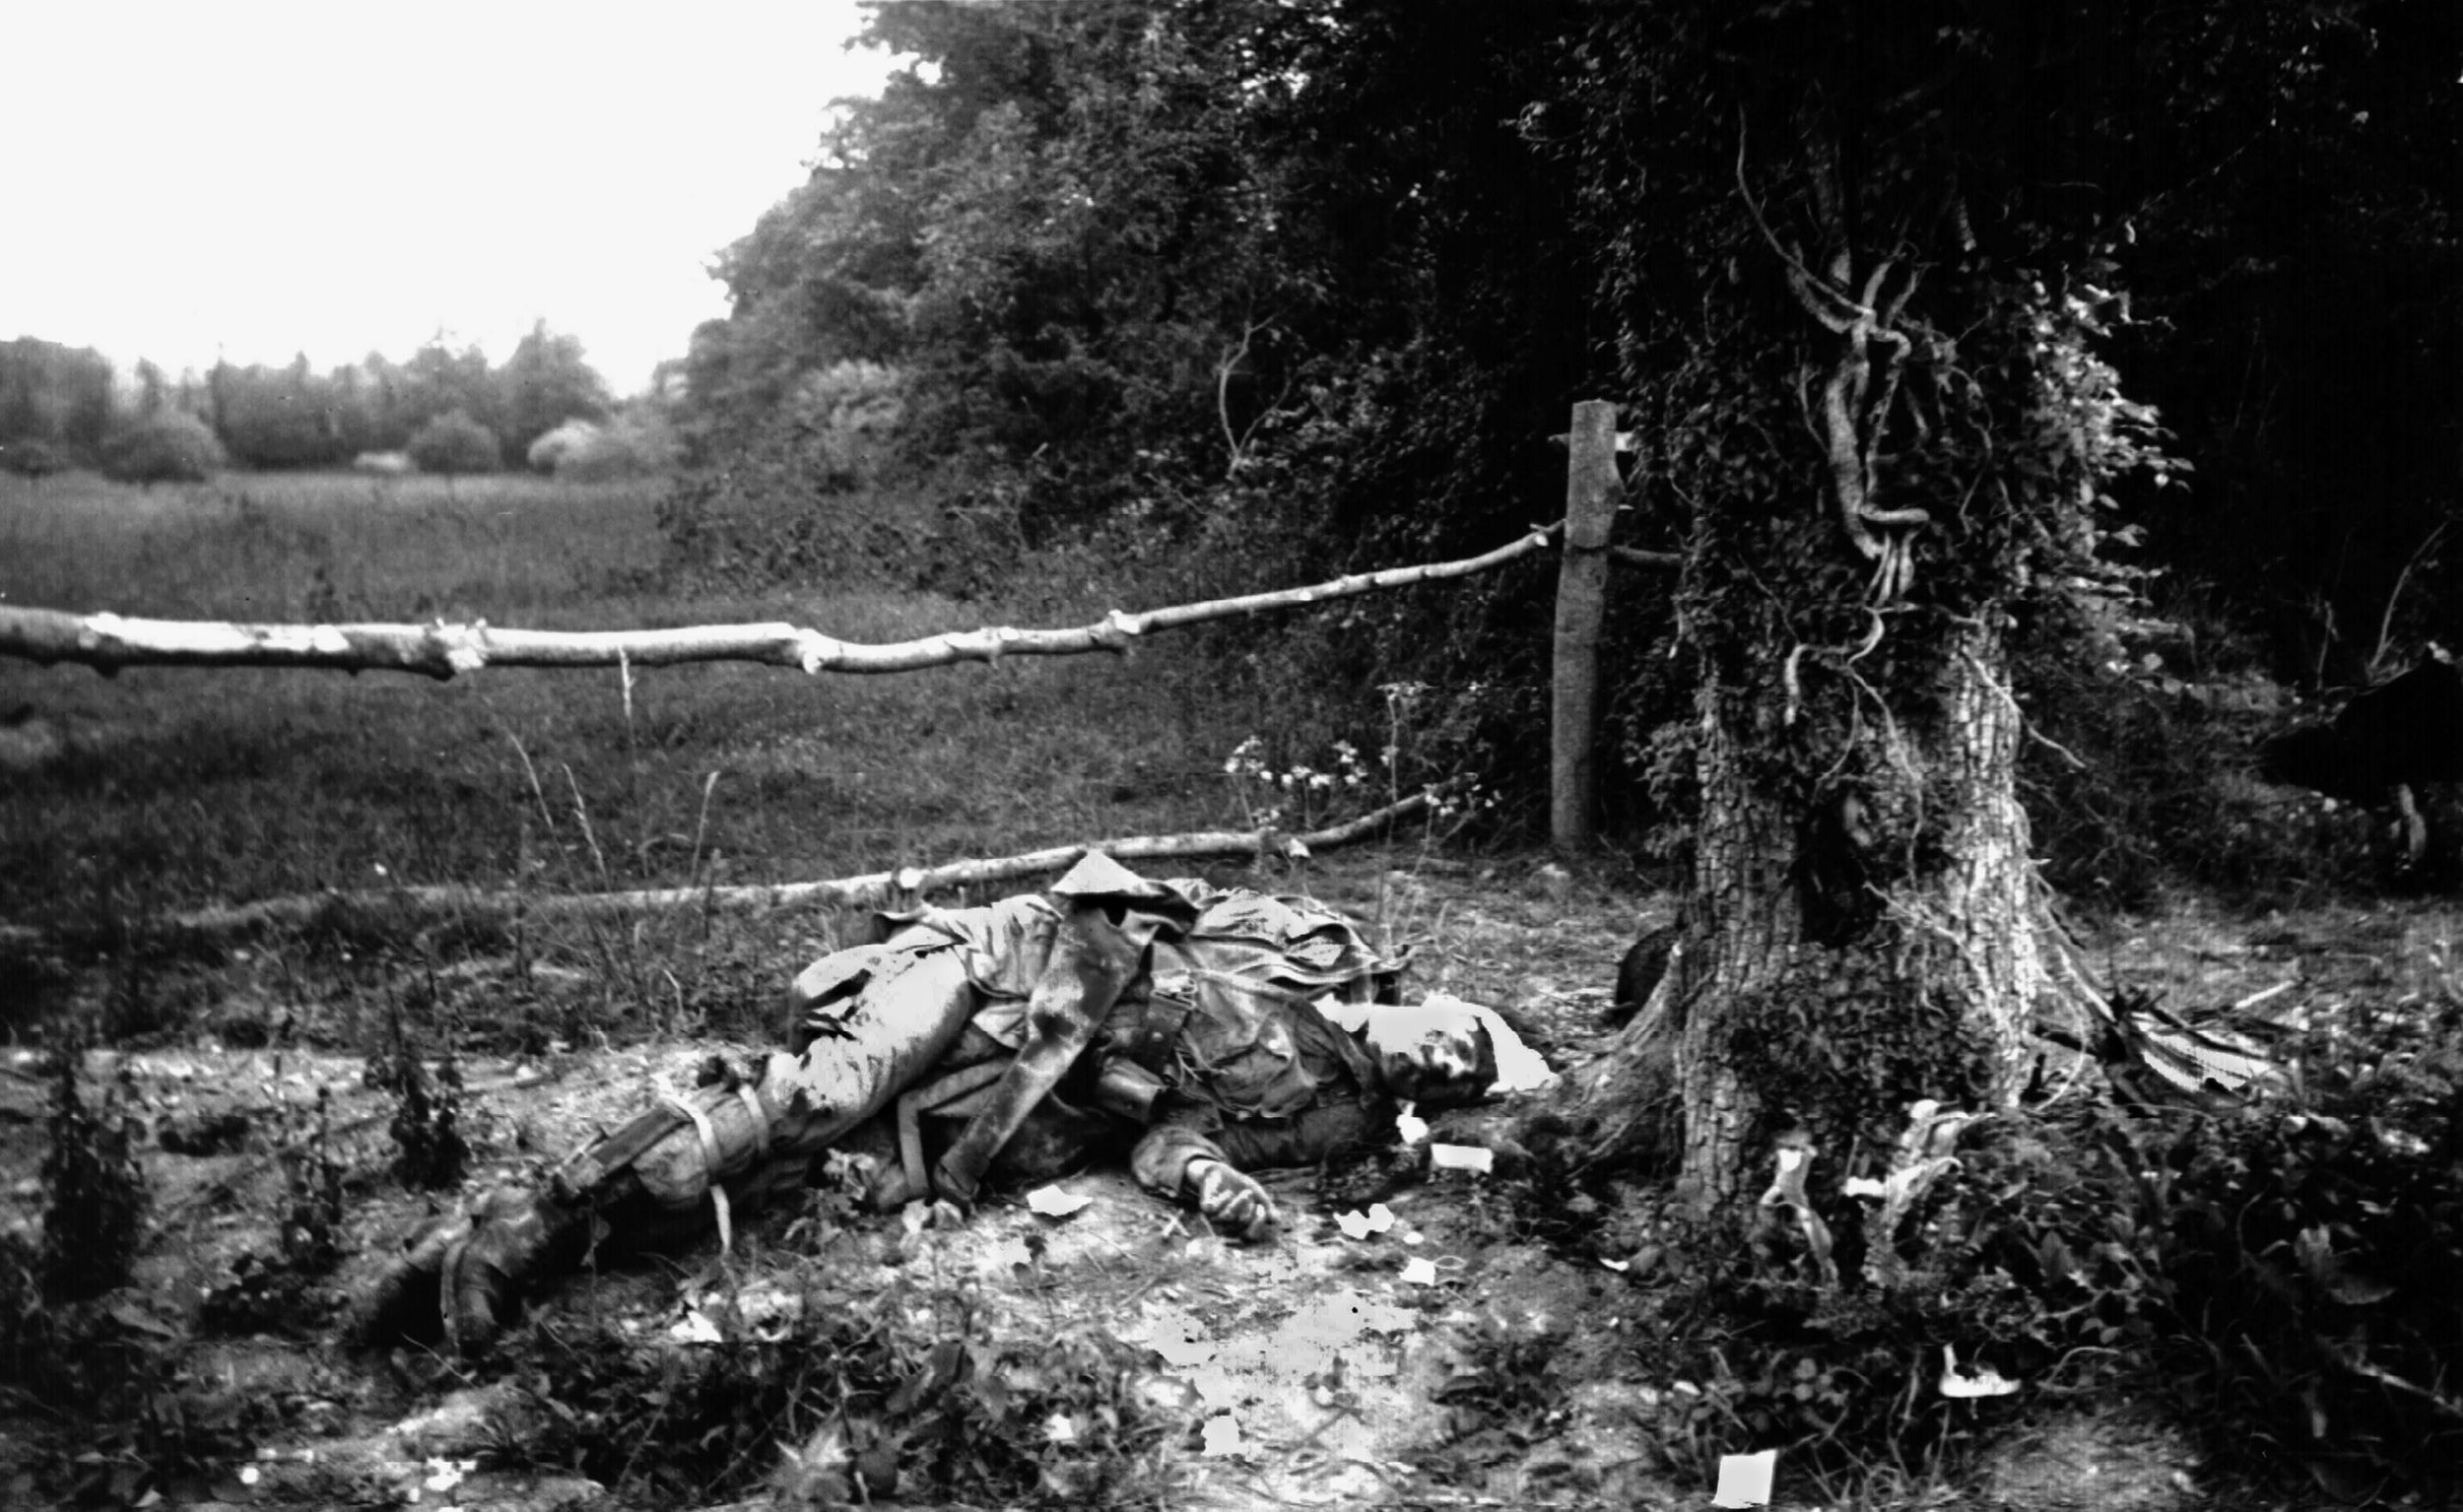 The body of a fallen American paratrooper mutely speaks of the courage and carnage that took place in and around Carentan from June 6 to the 20th, 1944. Although hit hard, Speirs and his men accomplished their mission